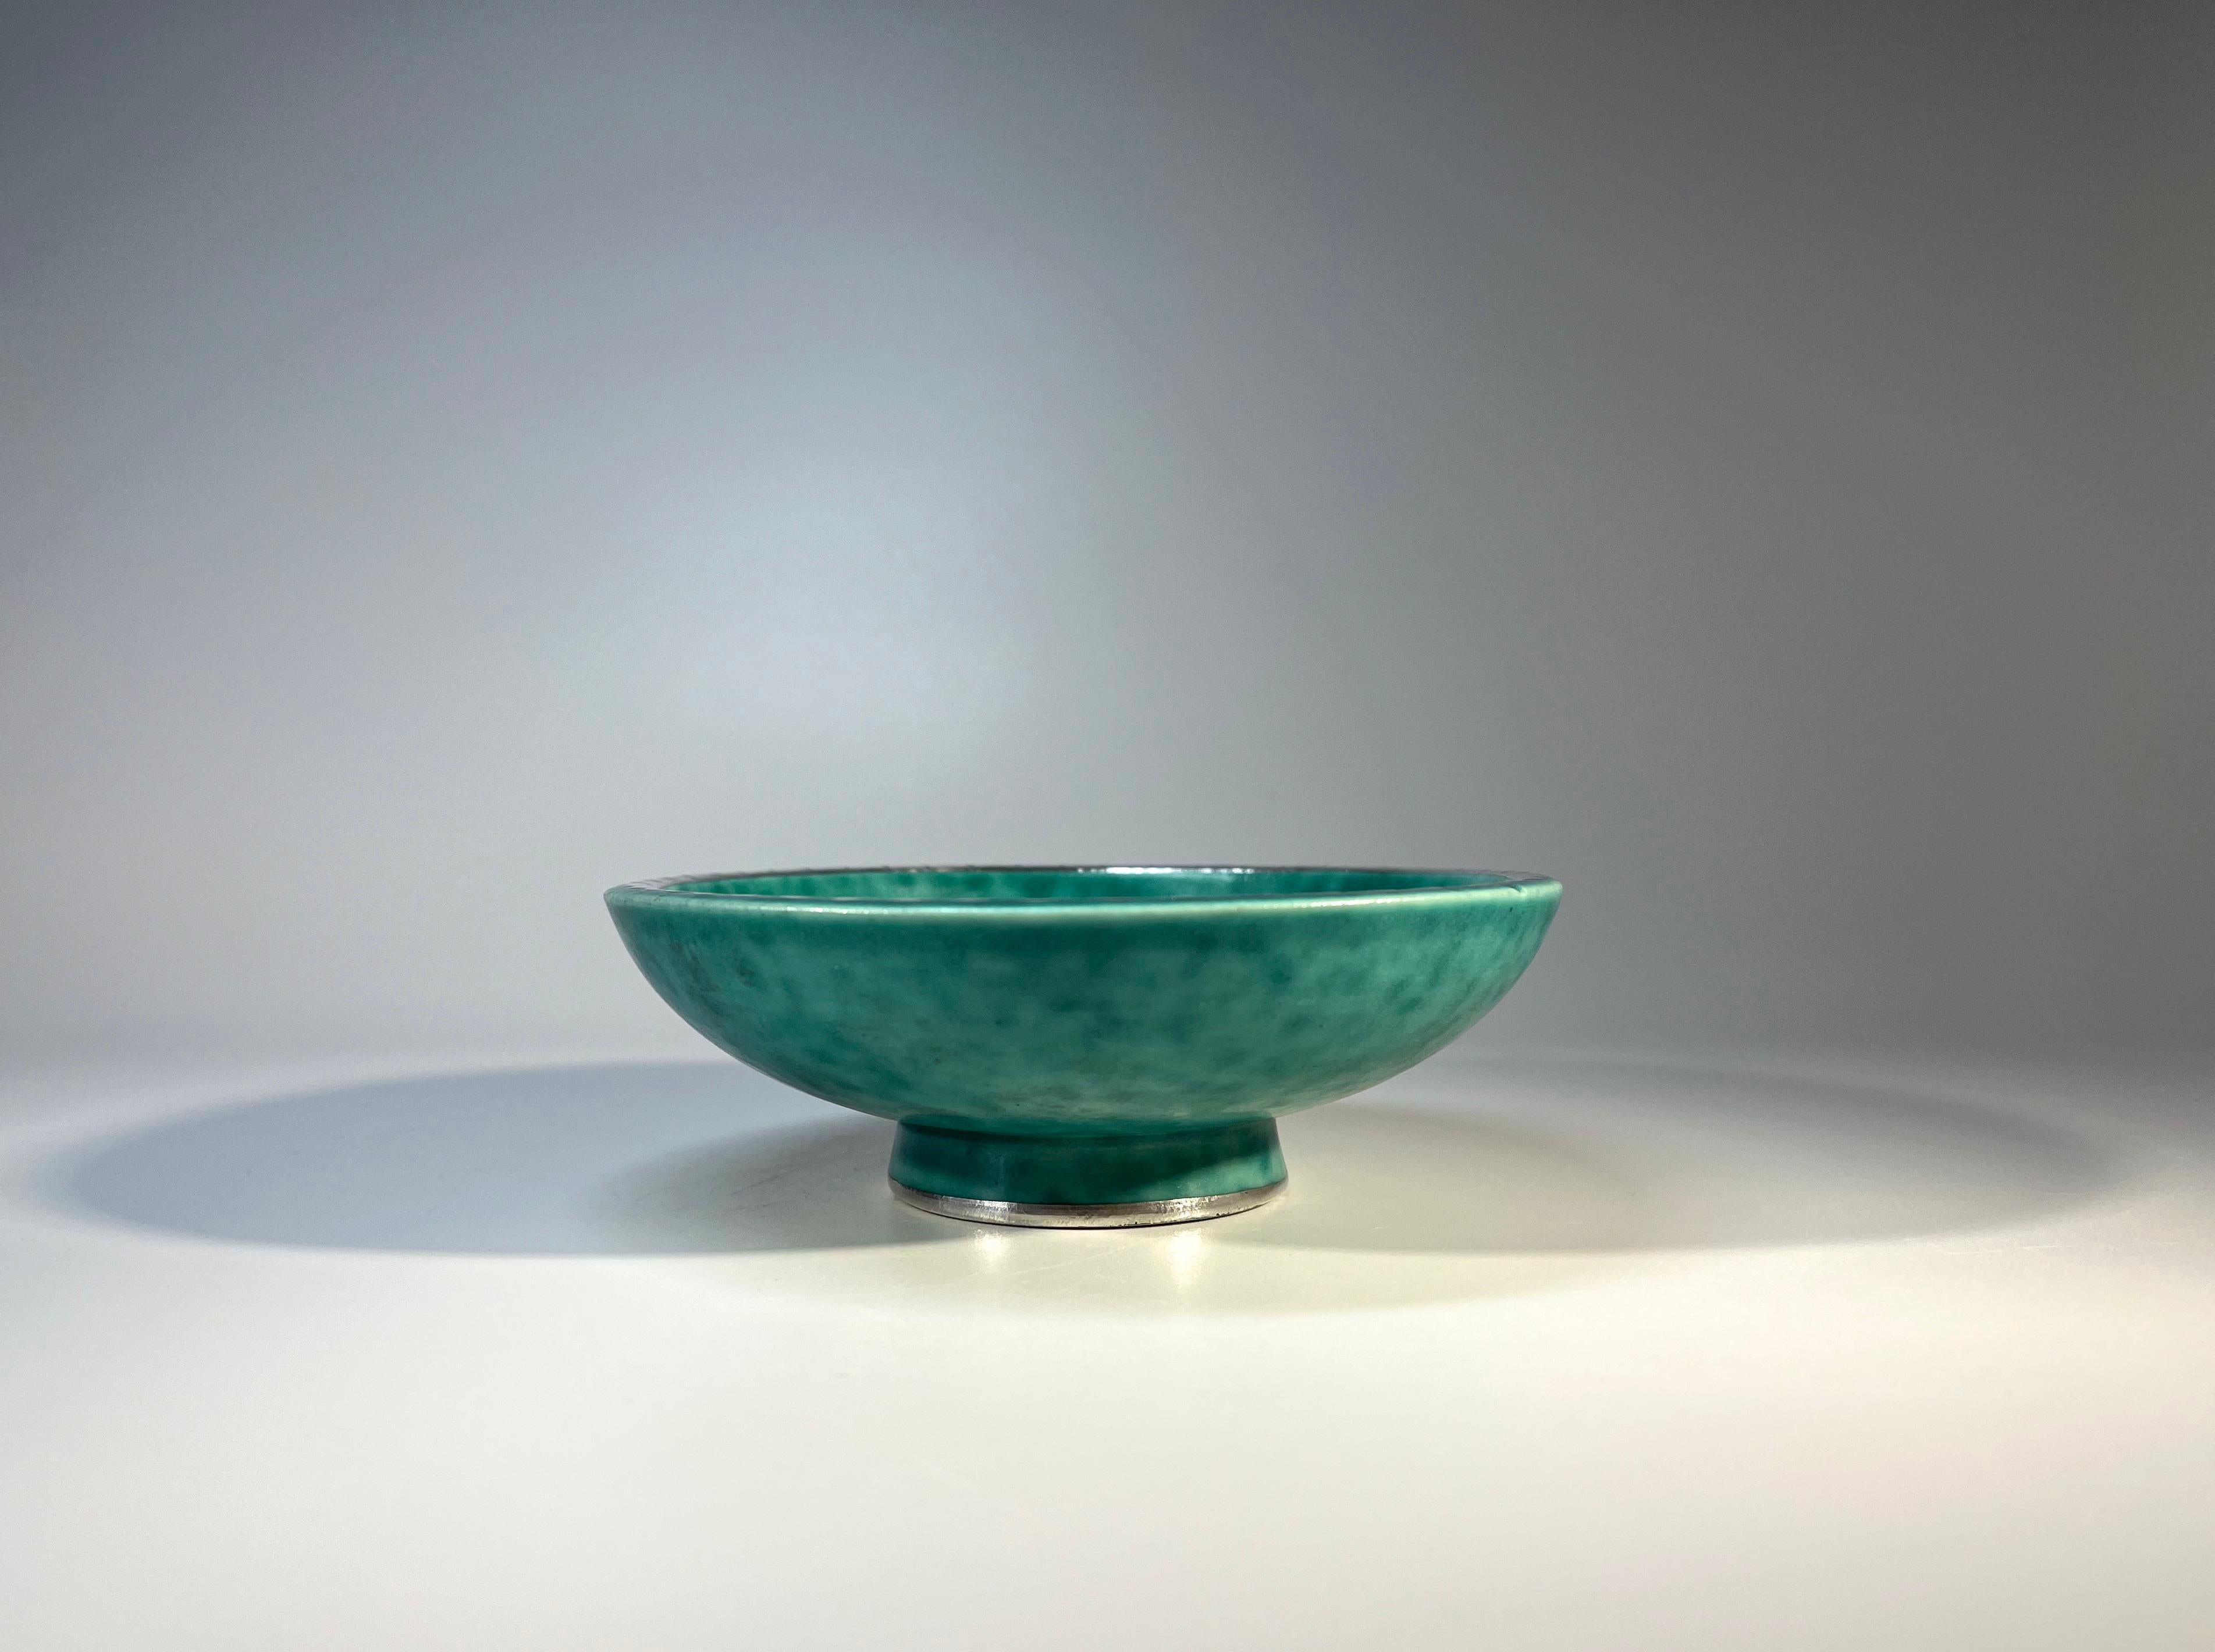 Stoneware Argenta dish by Wilhelm Kage for Gustavsberg, Sweden. 
Decorated with applied silver scalloped rim and trefoil flower sprigs  on green mottled stoneware
Circa 1960's
Stamped Gustavsberg Argenta on reverse #1094 II
Diameter 5 inch, Height